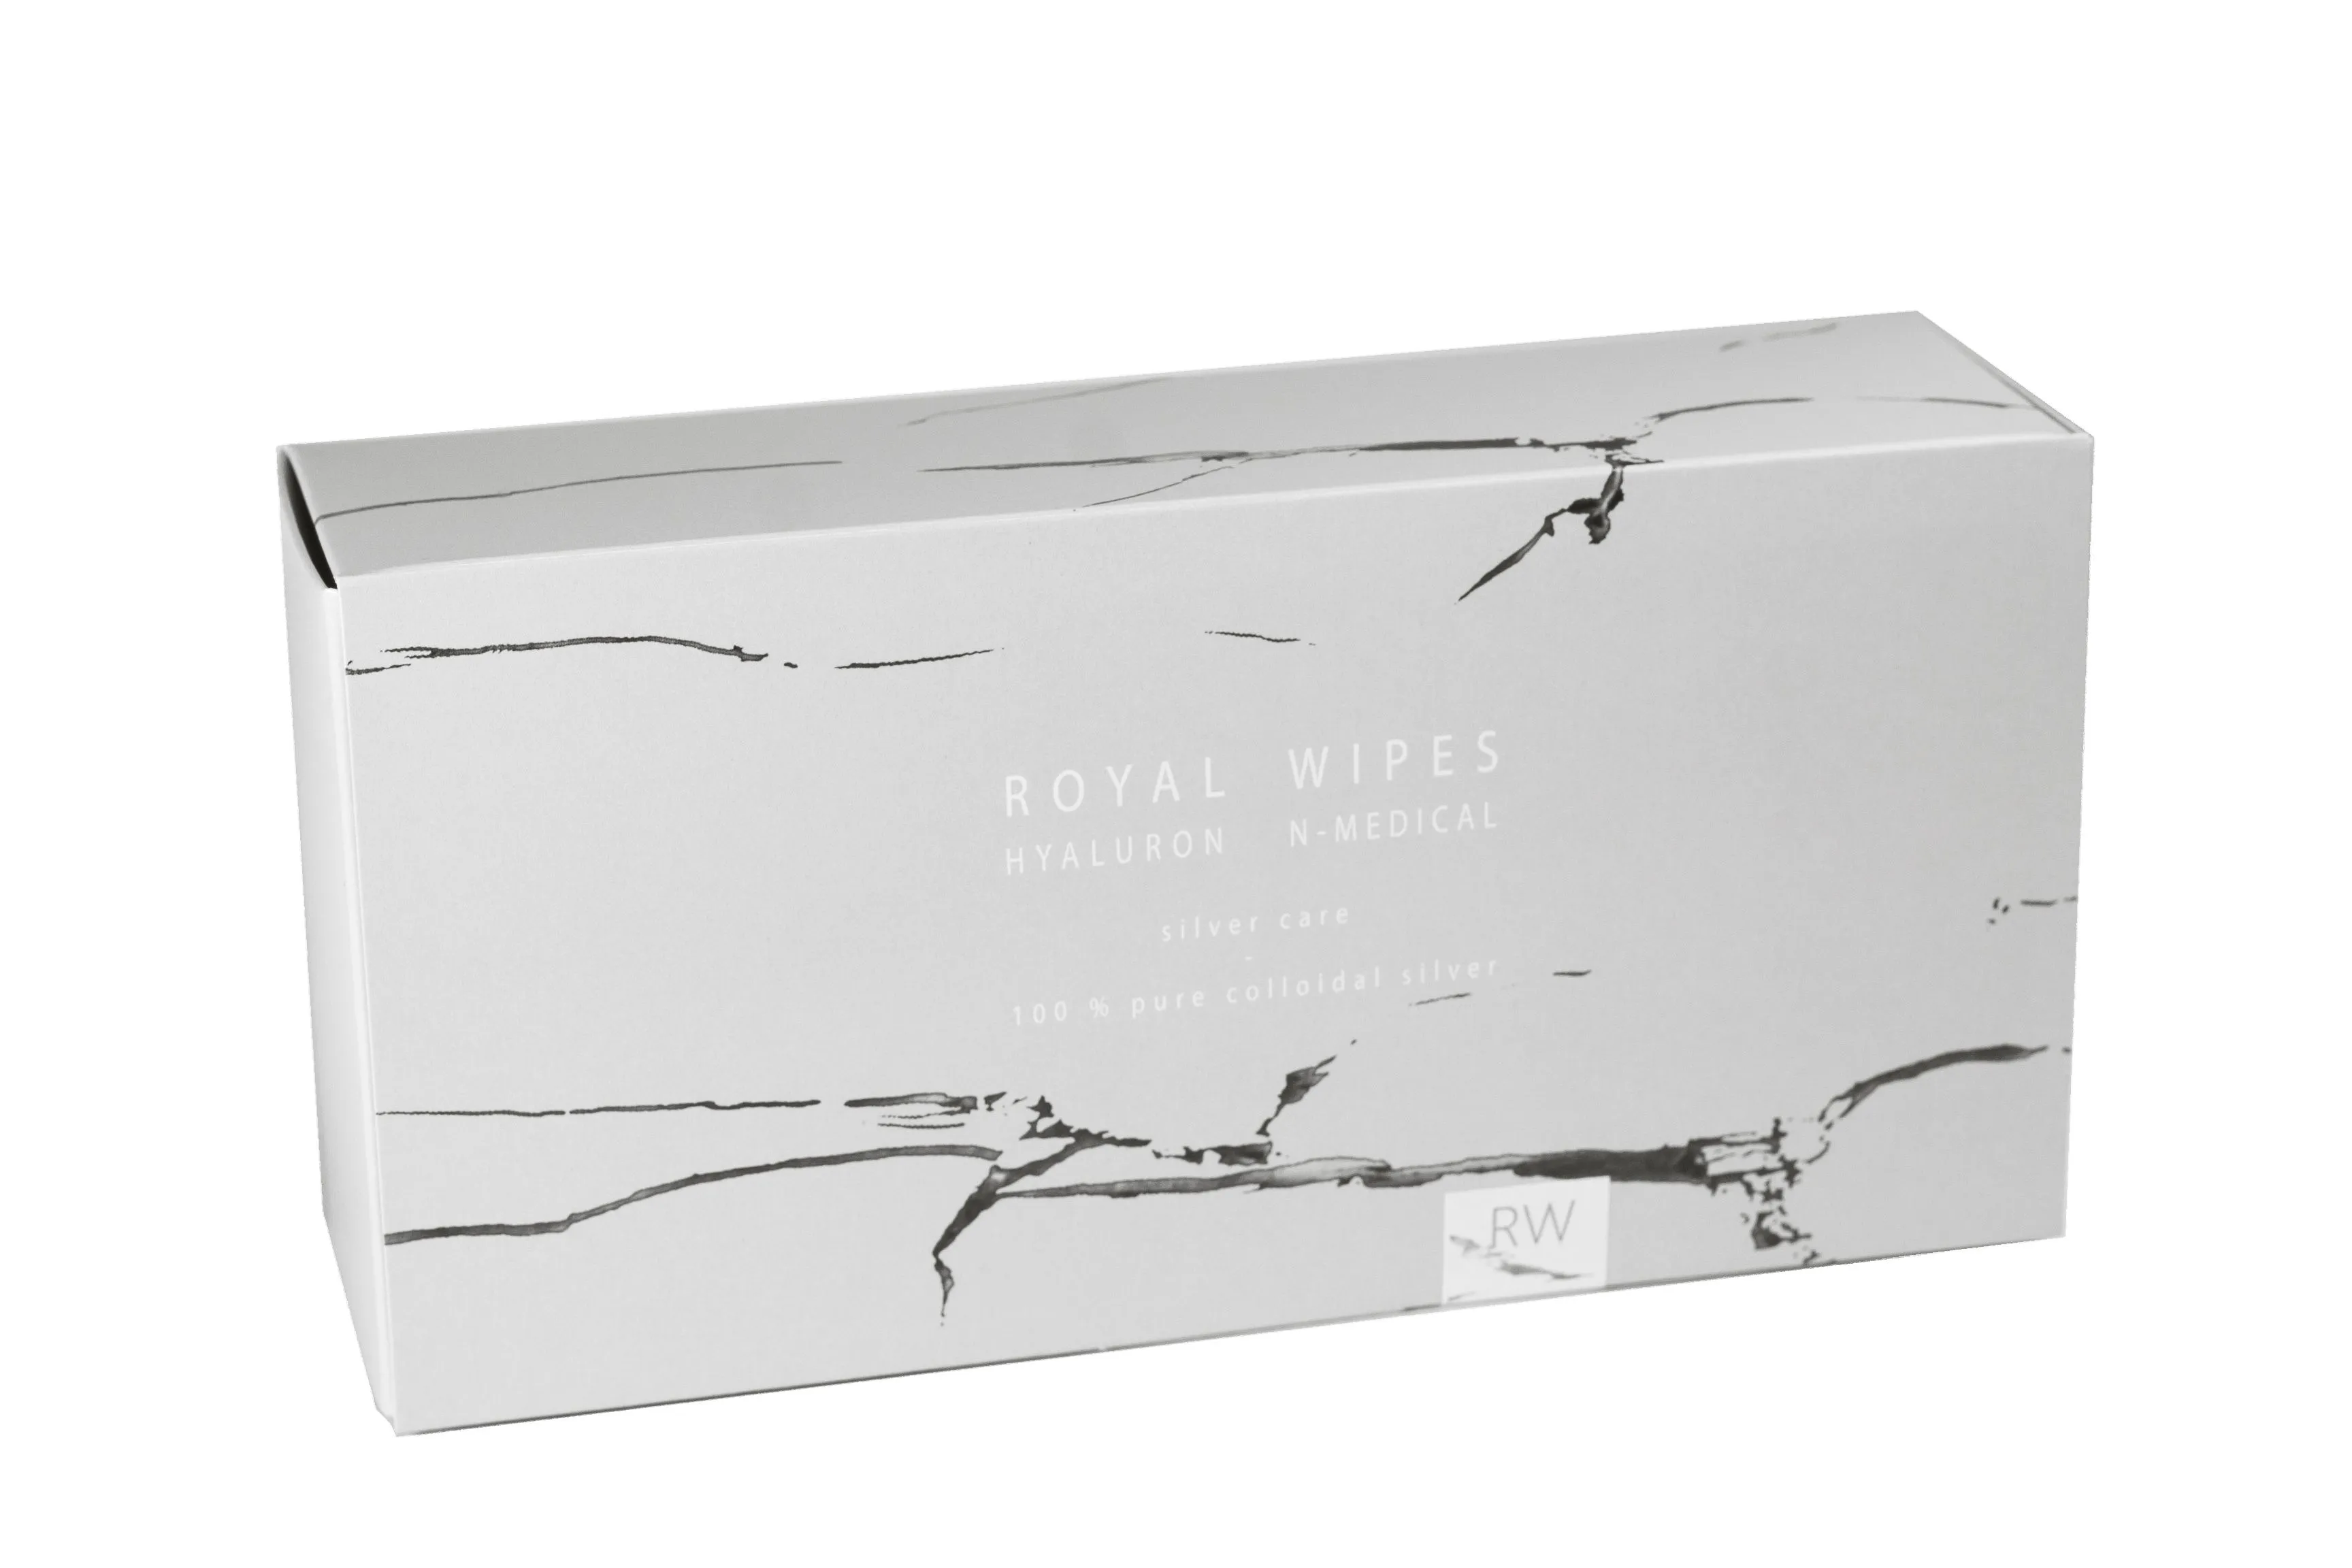 N-Medical Hyaluron Royal wipes Silver care ubrousky 30 ks